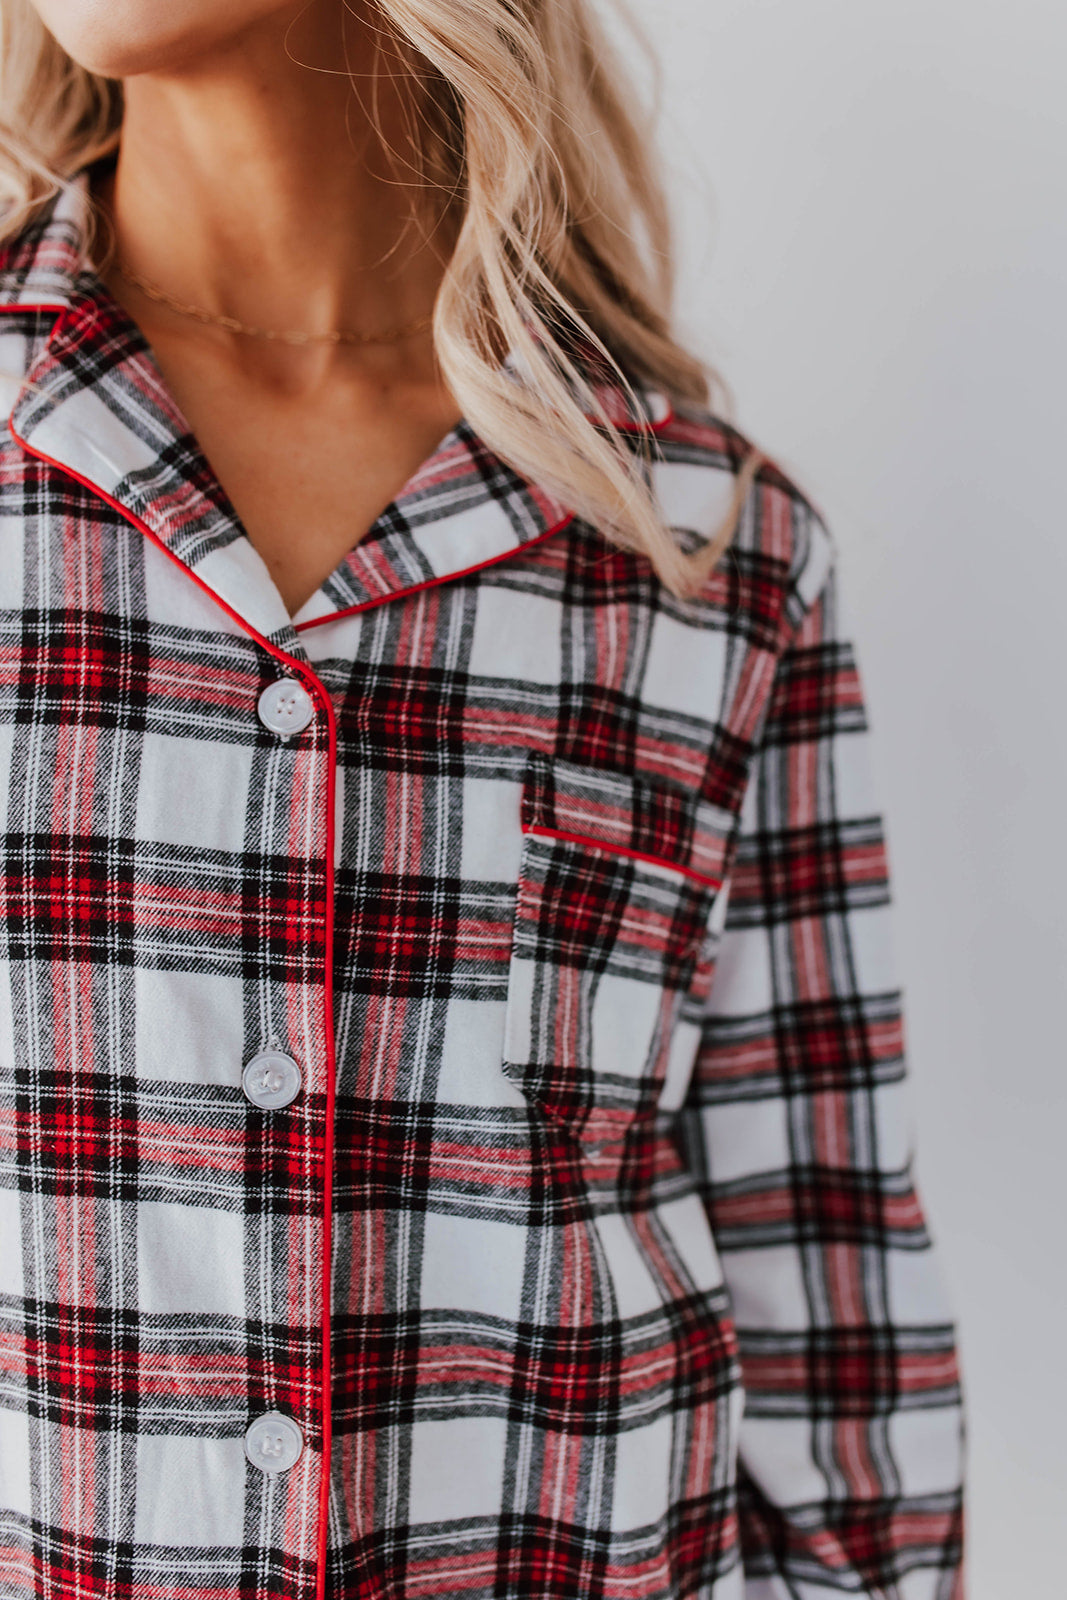 PLAID FIRESIDE FLANNEL Desert – THE IN RED PAJAMAS Pink